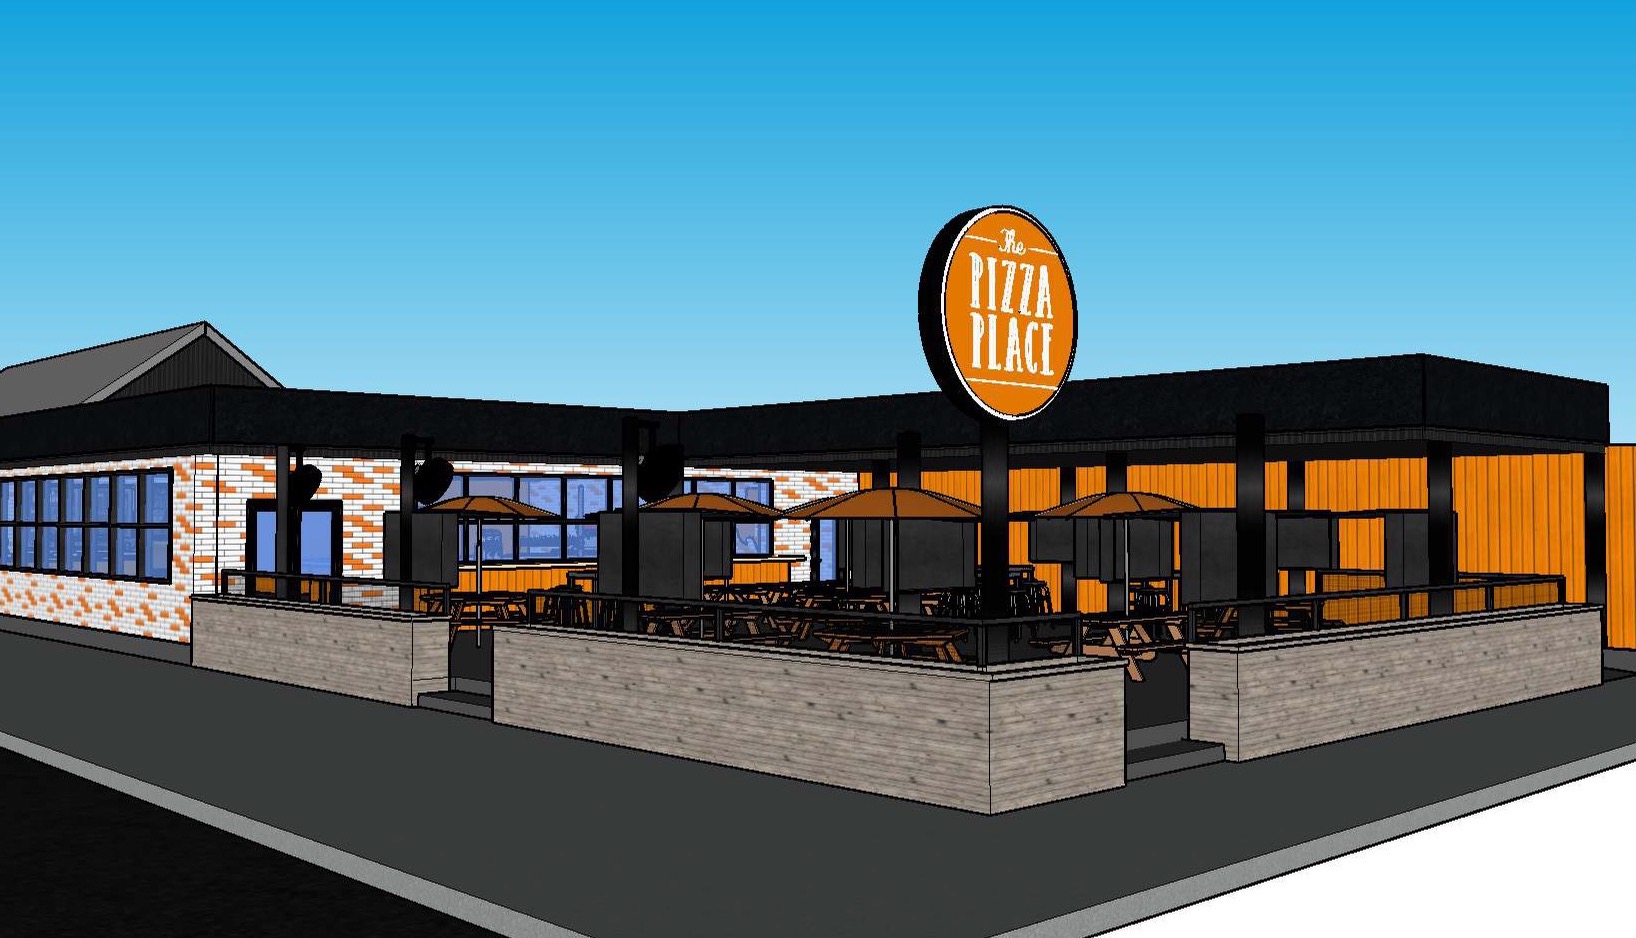 A rendering of the Pizza Place shows a restaurant with a massive covered outdoor patio.